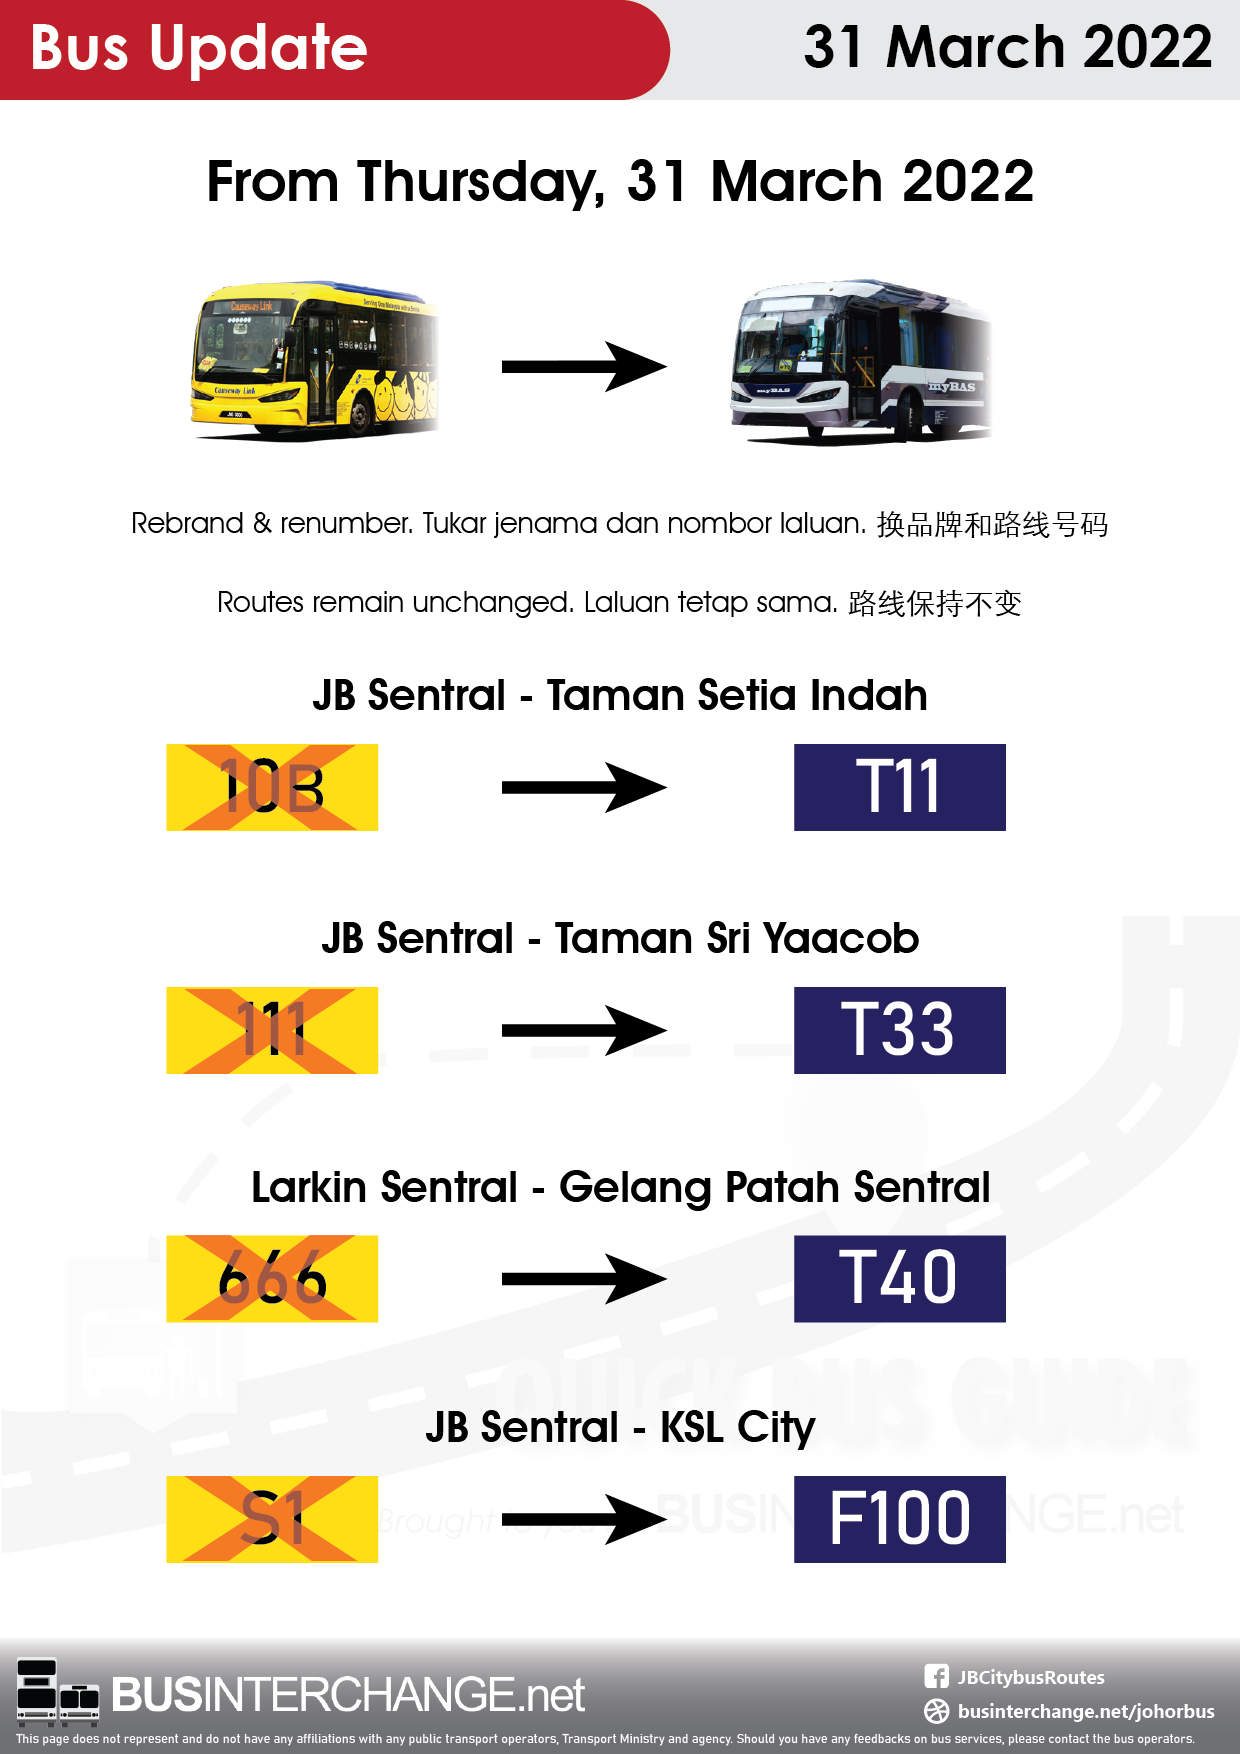 Causeway Link bus routes 10B, 111, 666 and S1 rebranded and renumbered to T11, T33, T40 and F100 respectively.